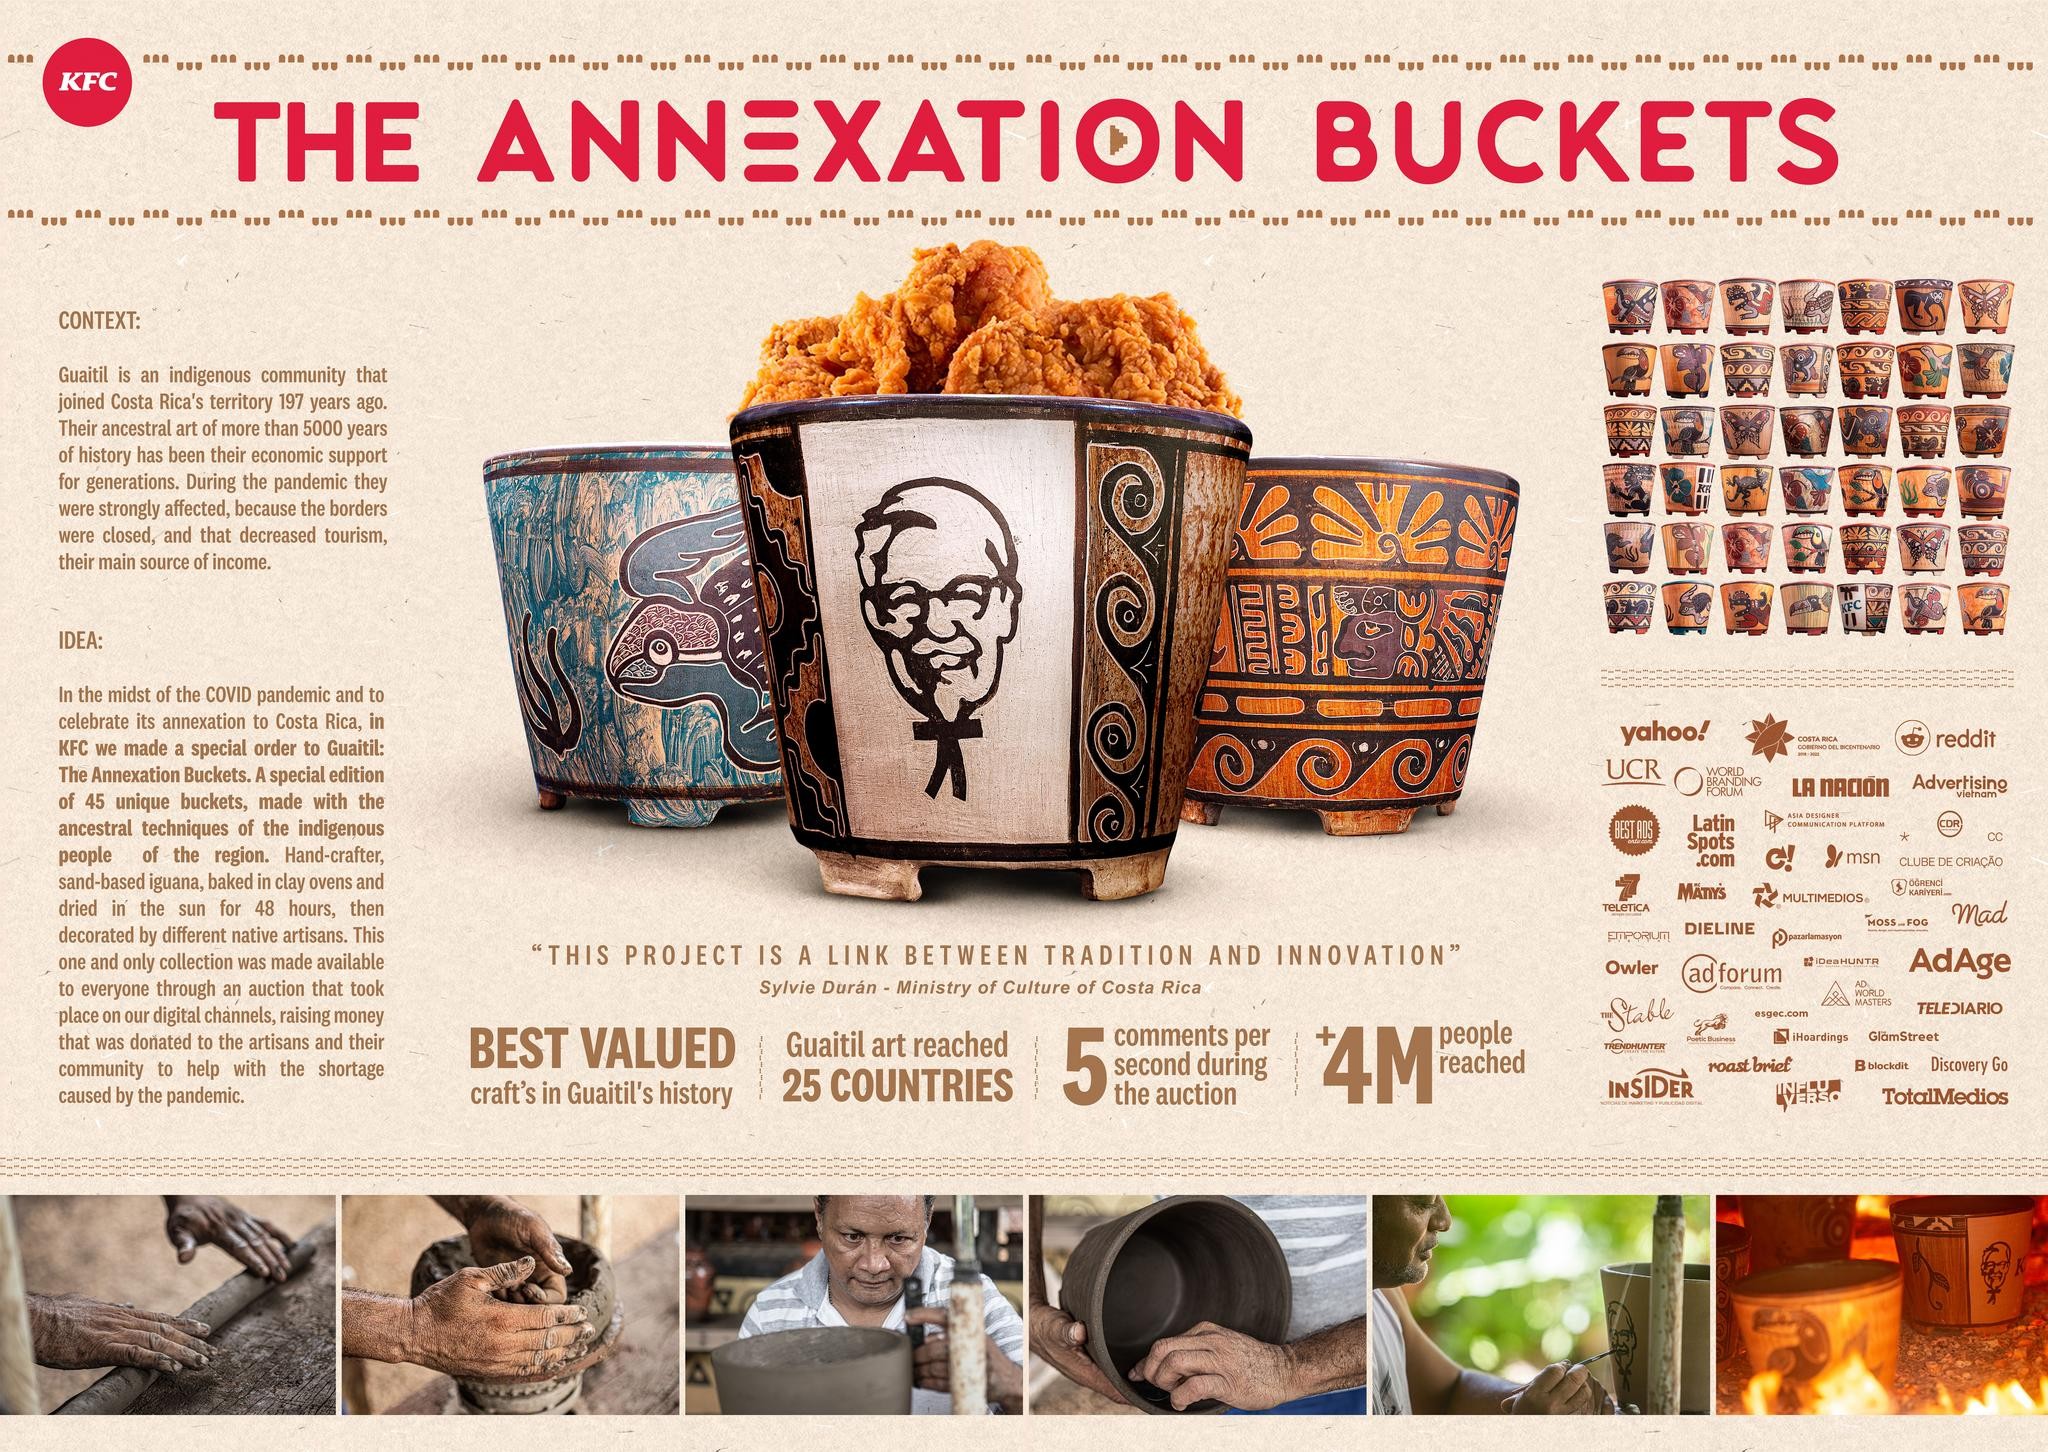 THE ANNEXATION BUCKETS